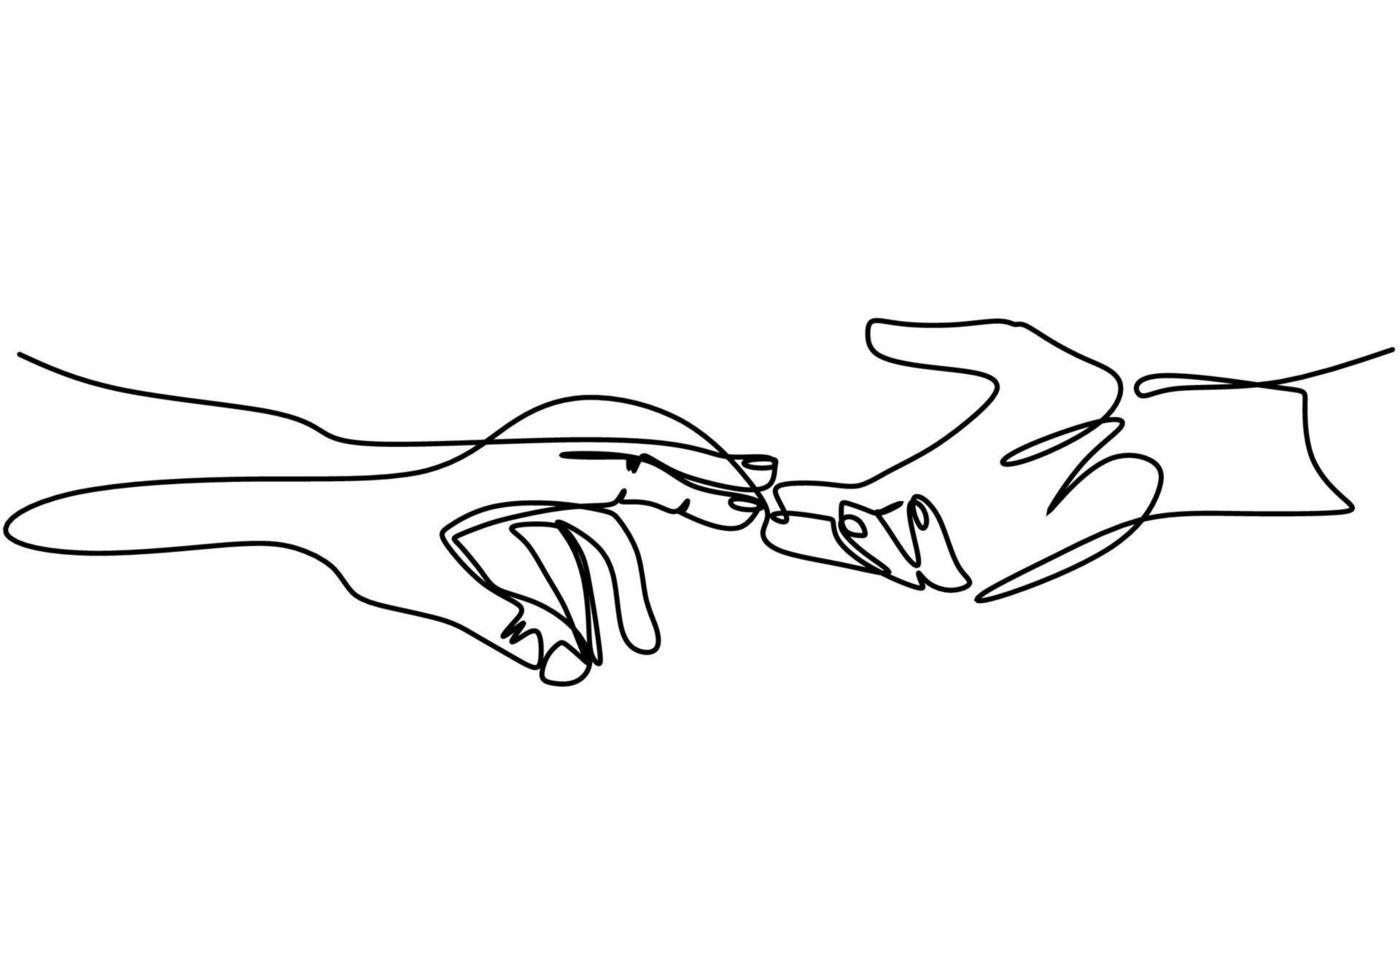 Continuous one single line man and woman hands holding together. Expression of love with holding hands each other isolate on white background. Romantic concept minimalist style. Vector illustration